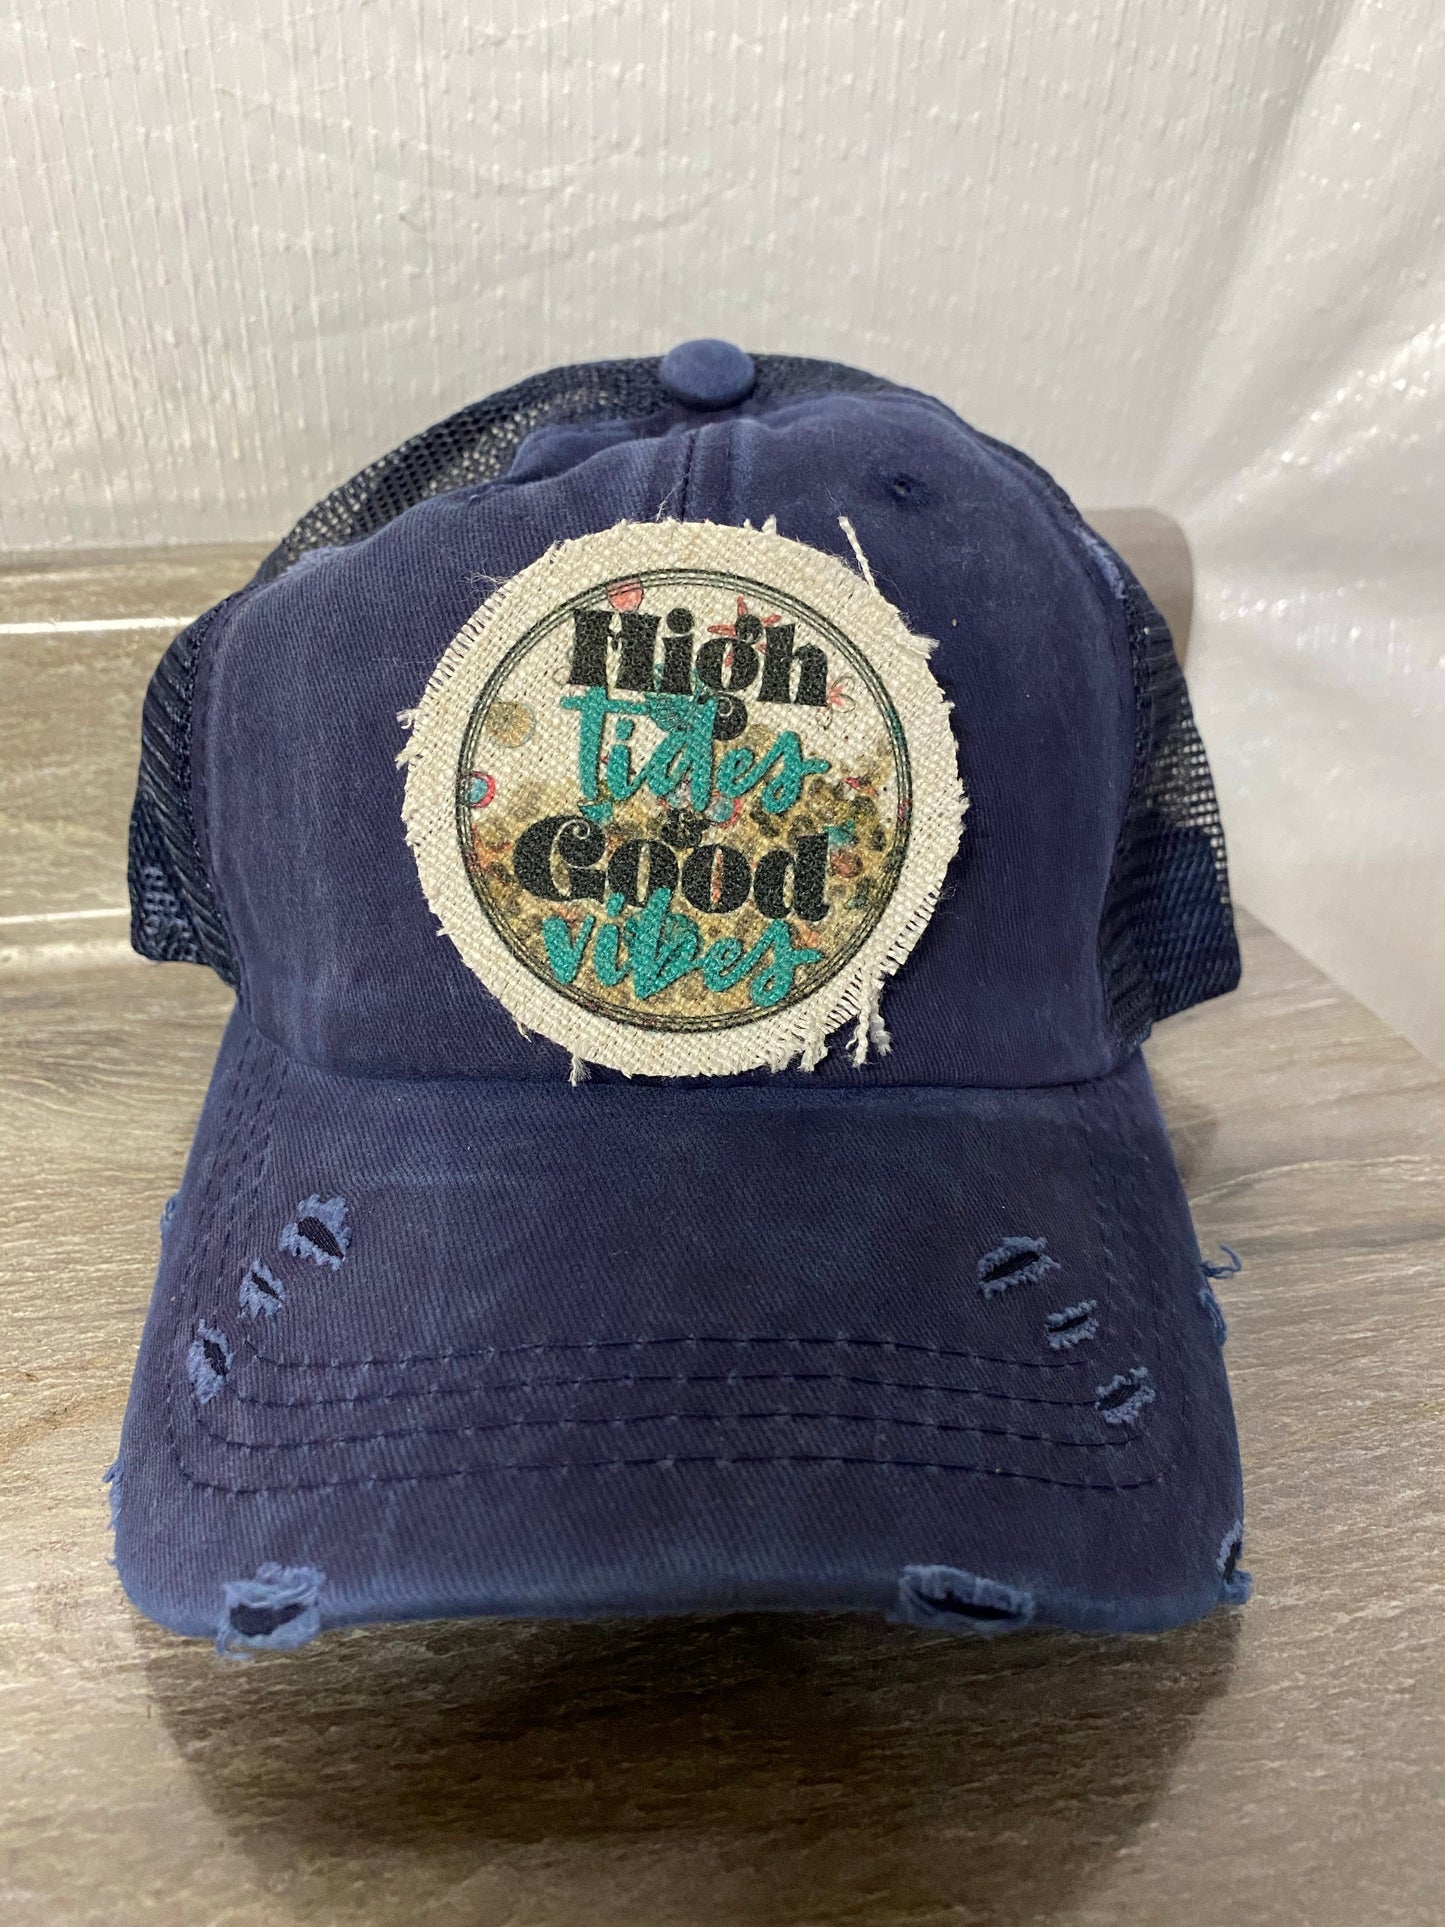 High Tides Good Vibes Hat Patch